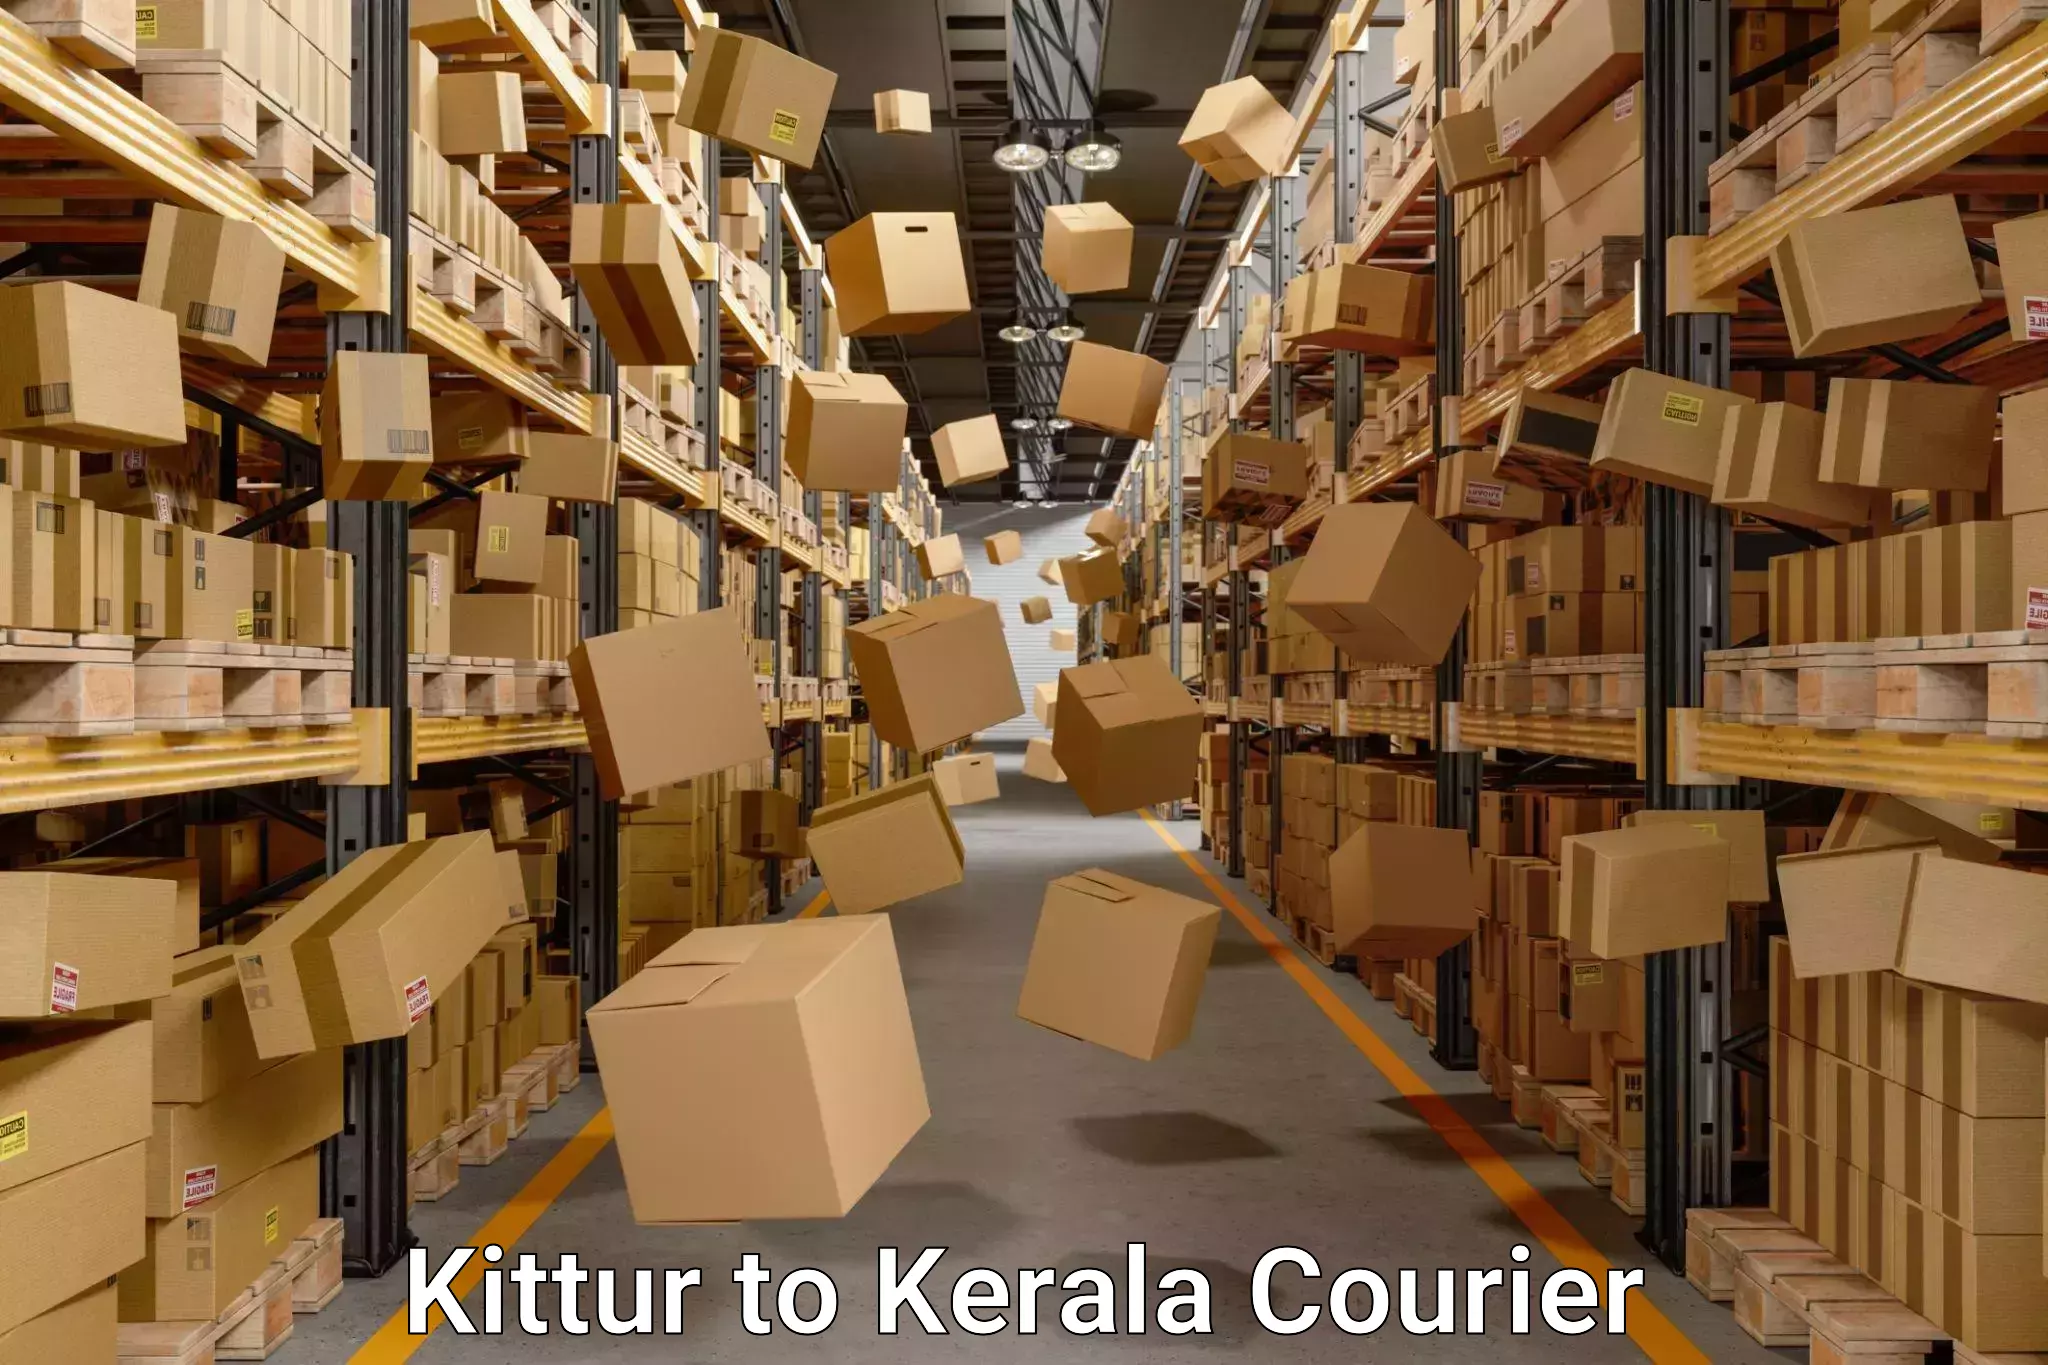 Trusted relocation experts Kittur to Kerala